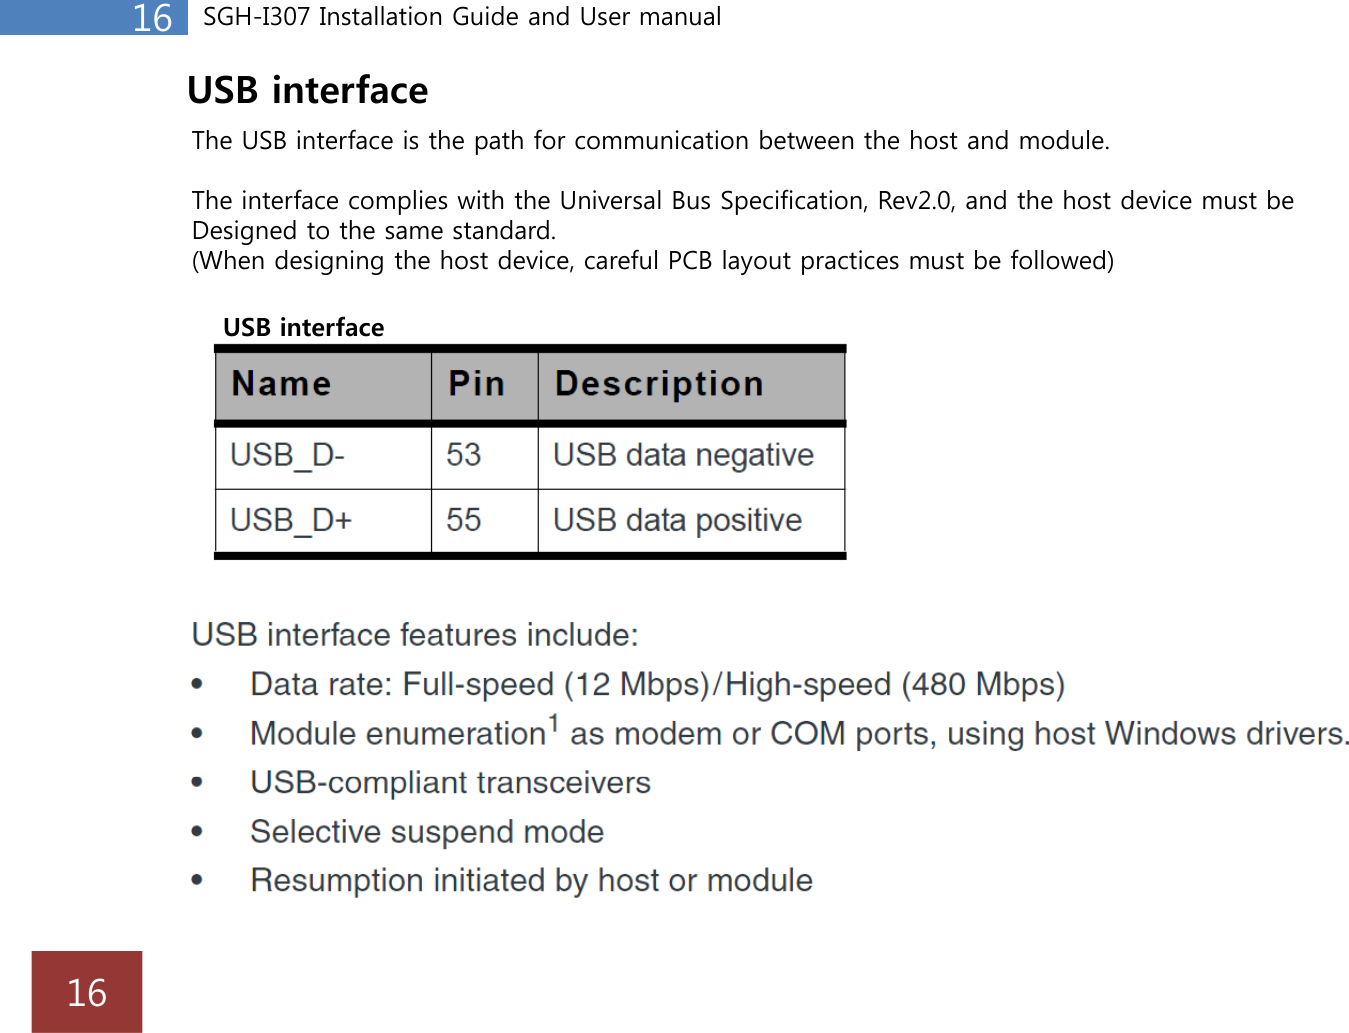 16 SGH-I307 Installation Guide and User manualUSB interfaceThe USB interface is the path for communication between the host and module.The interface complies with the Universal Bus Specification, Rev2.0, and the host device must beppDesigned to the same standard.(When designing the host device, careful PCB layout practices must be followed) USB interface16